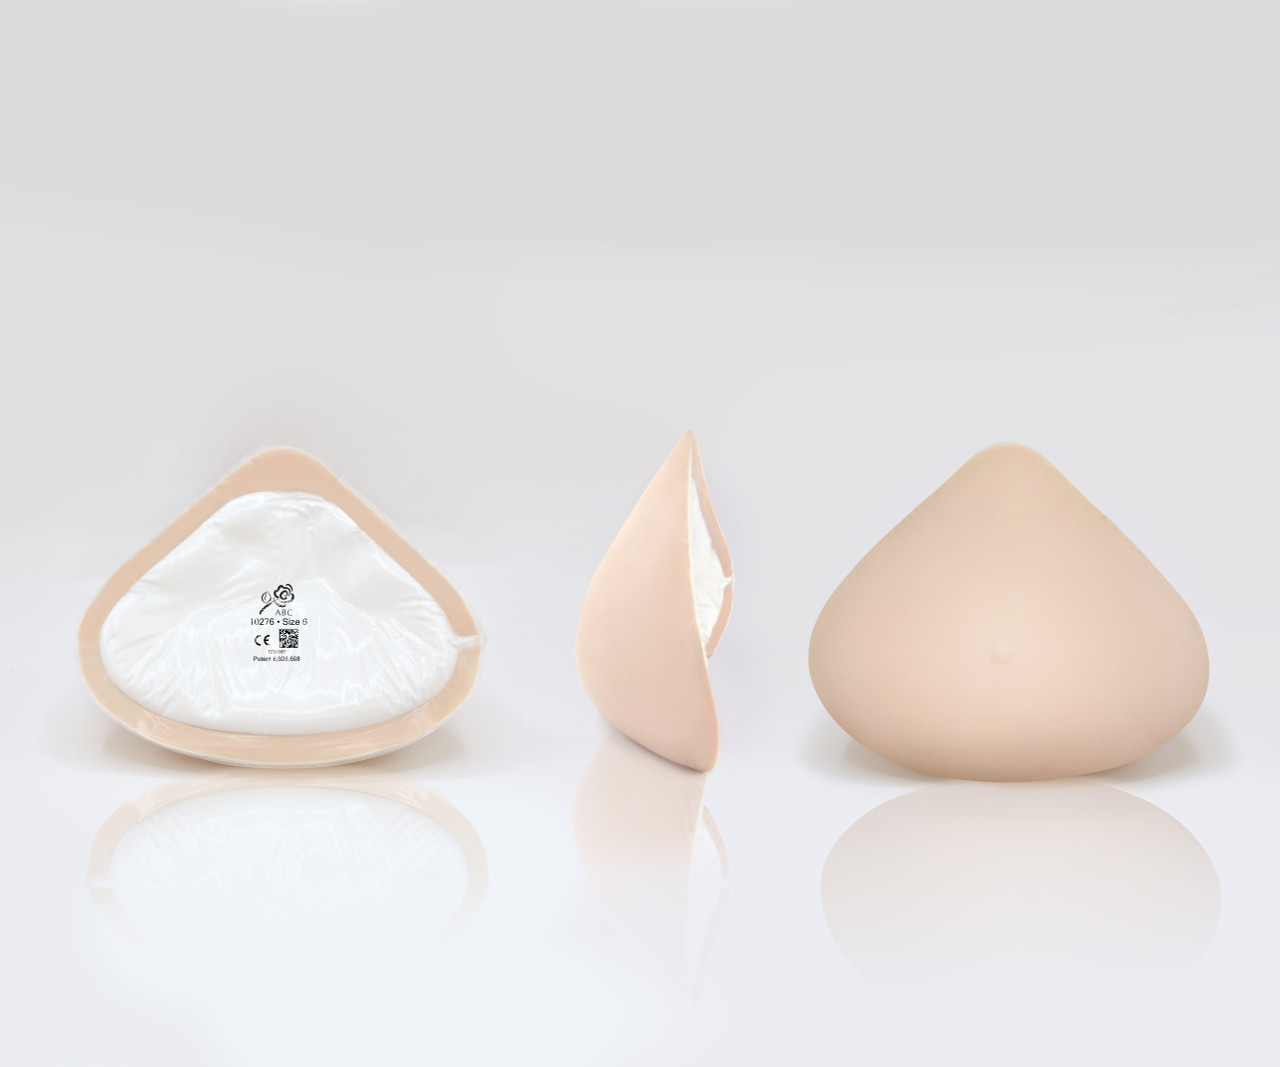 1 Pair Silicone Breast Form Triangle Mastectomy Prosthesis Bra Pad